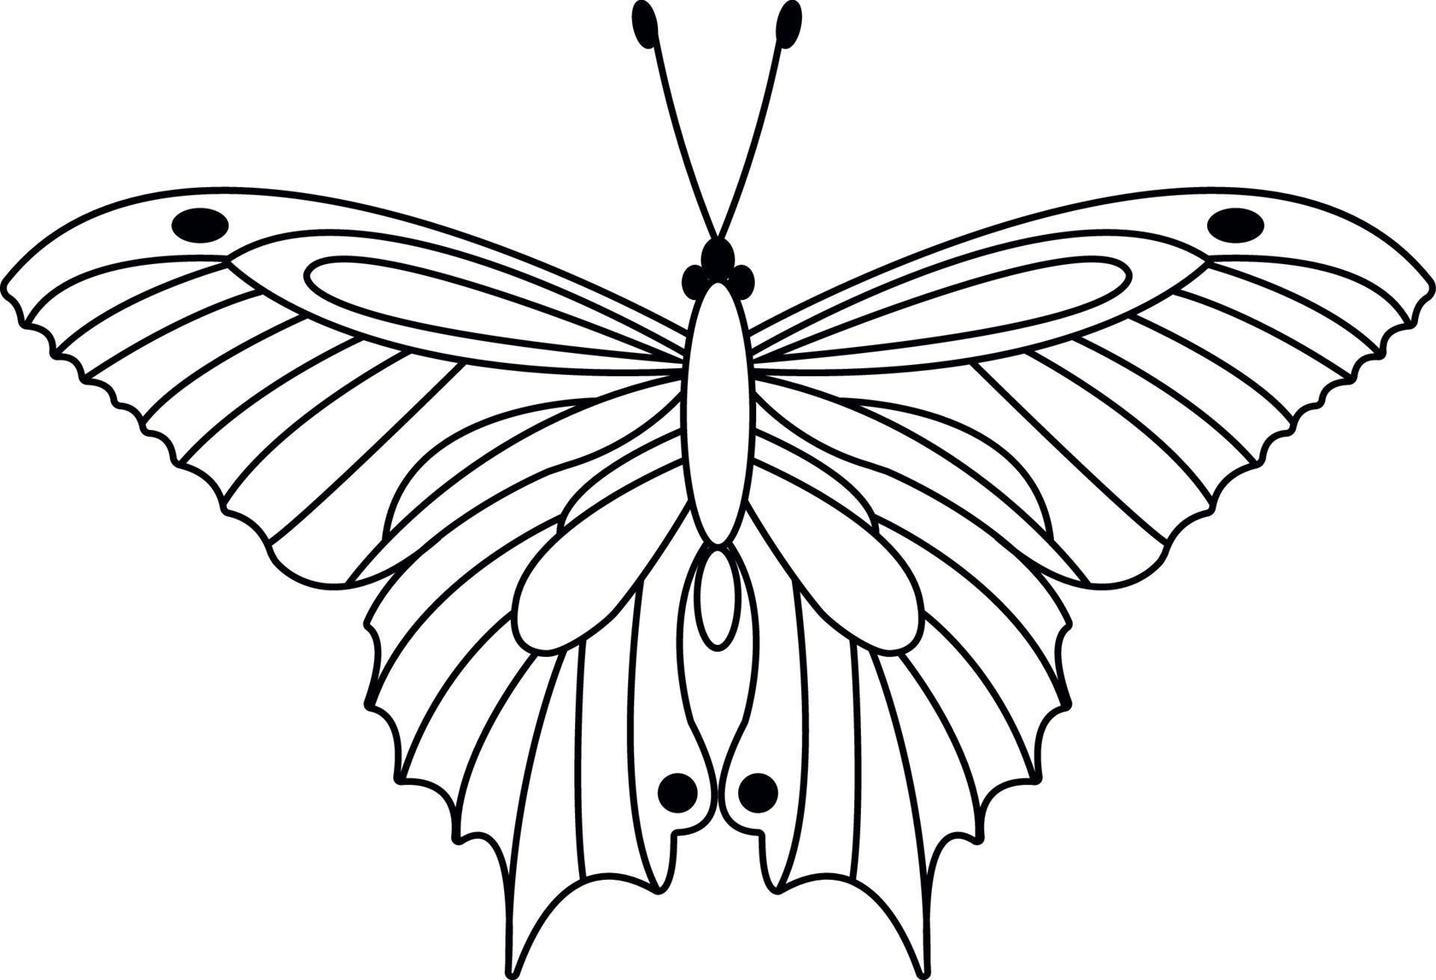 Butterfly vector illustration. Line art on white. Icon